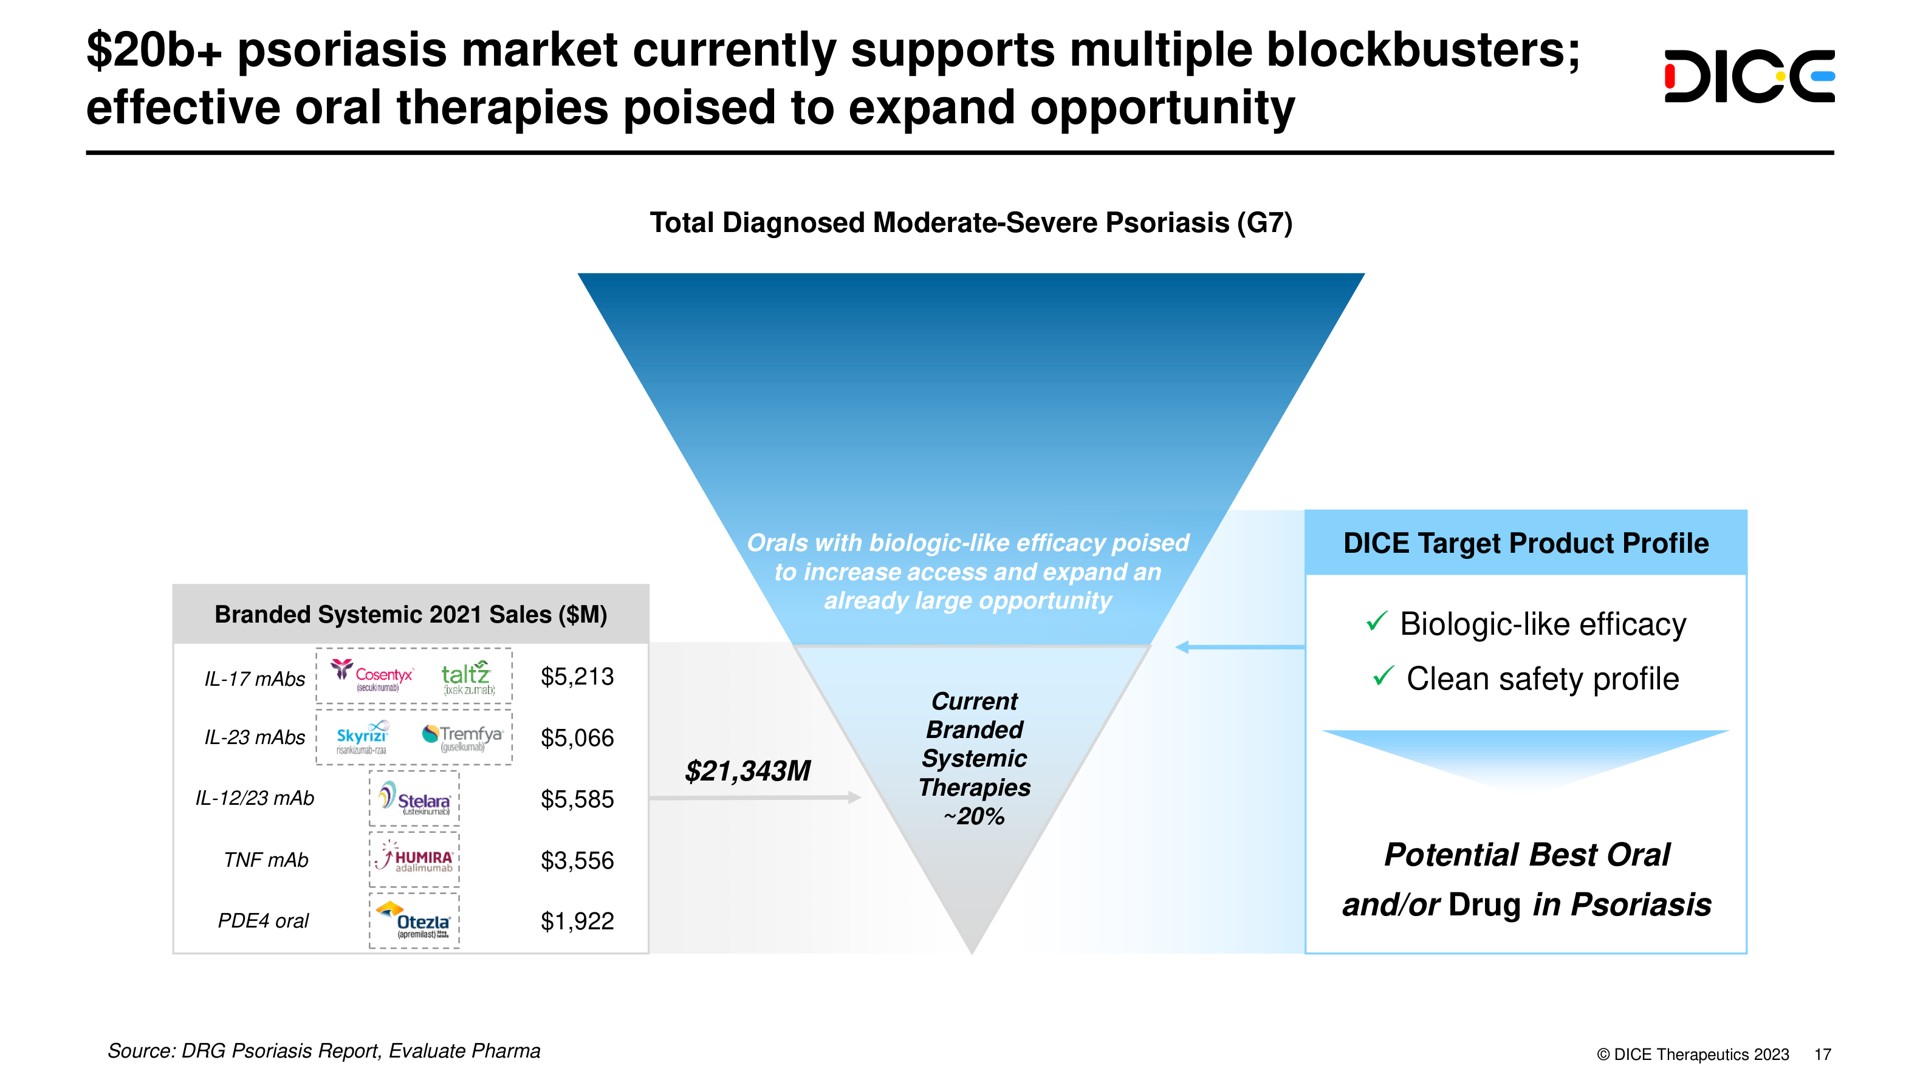 psoriasis market currently supports multiple blockbusters effective oral therapies poised to expand opportunity dice | DICE Therapeutics